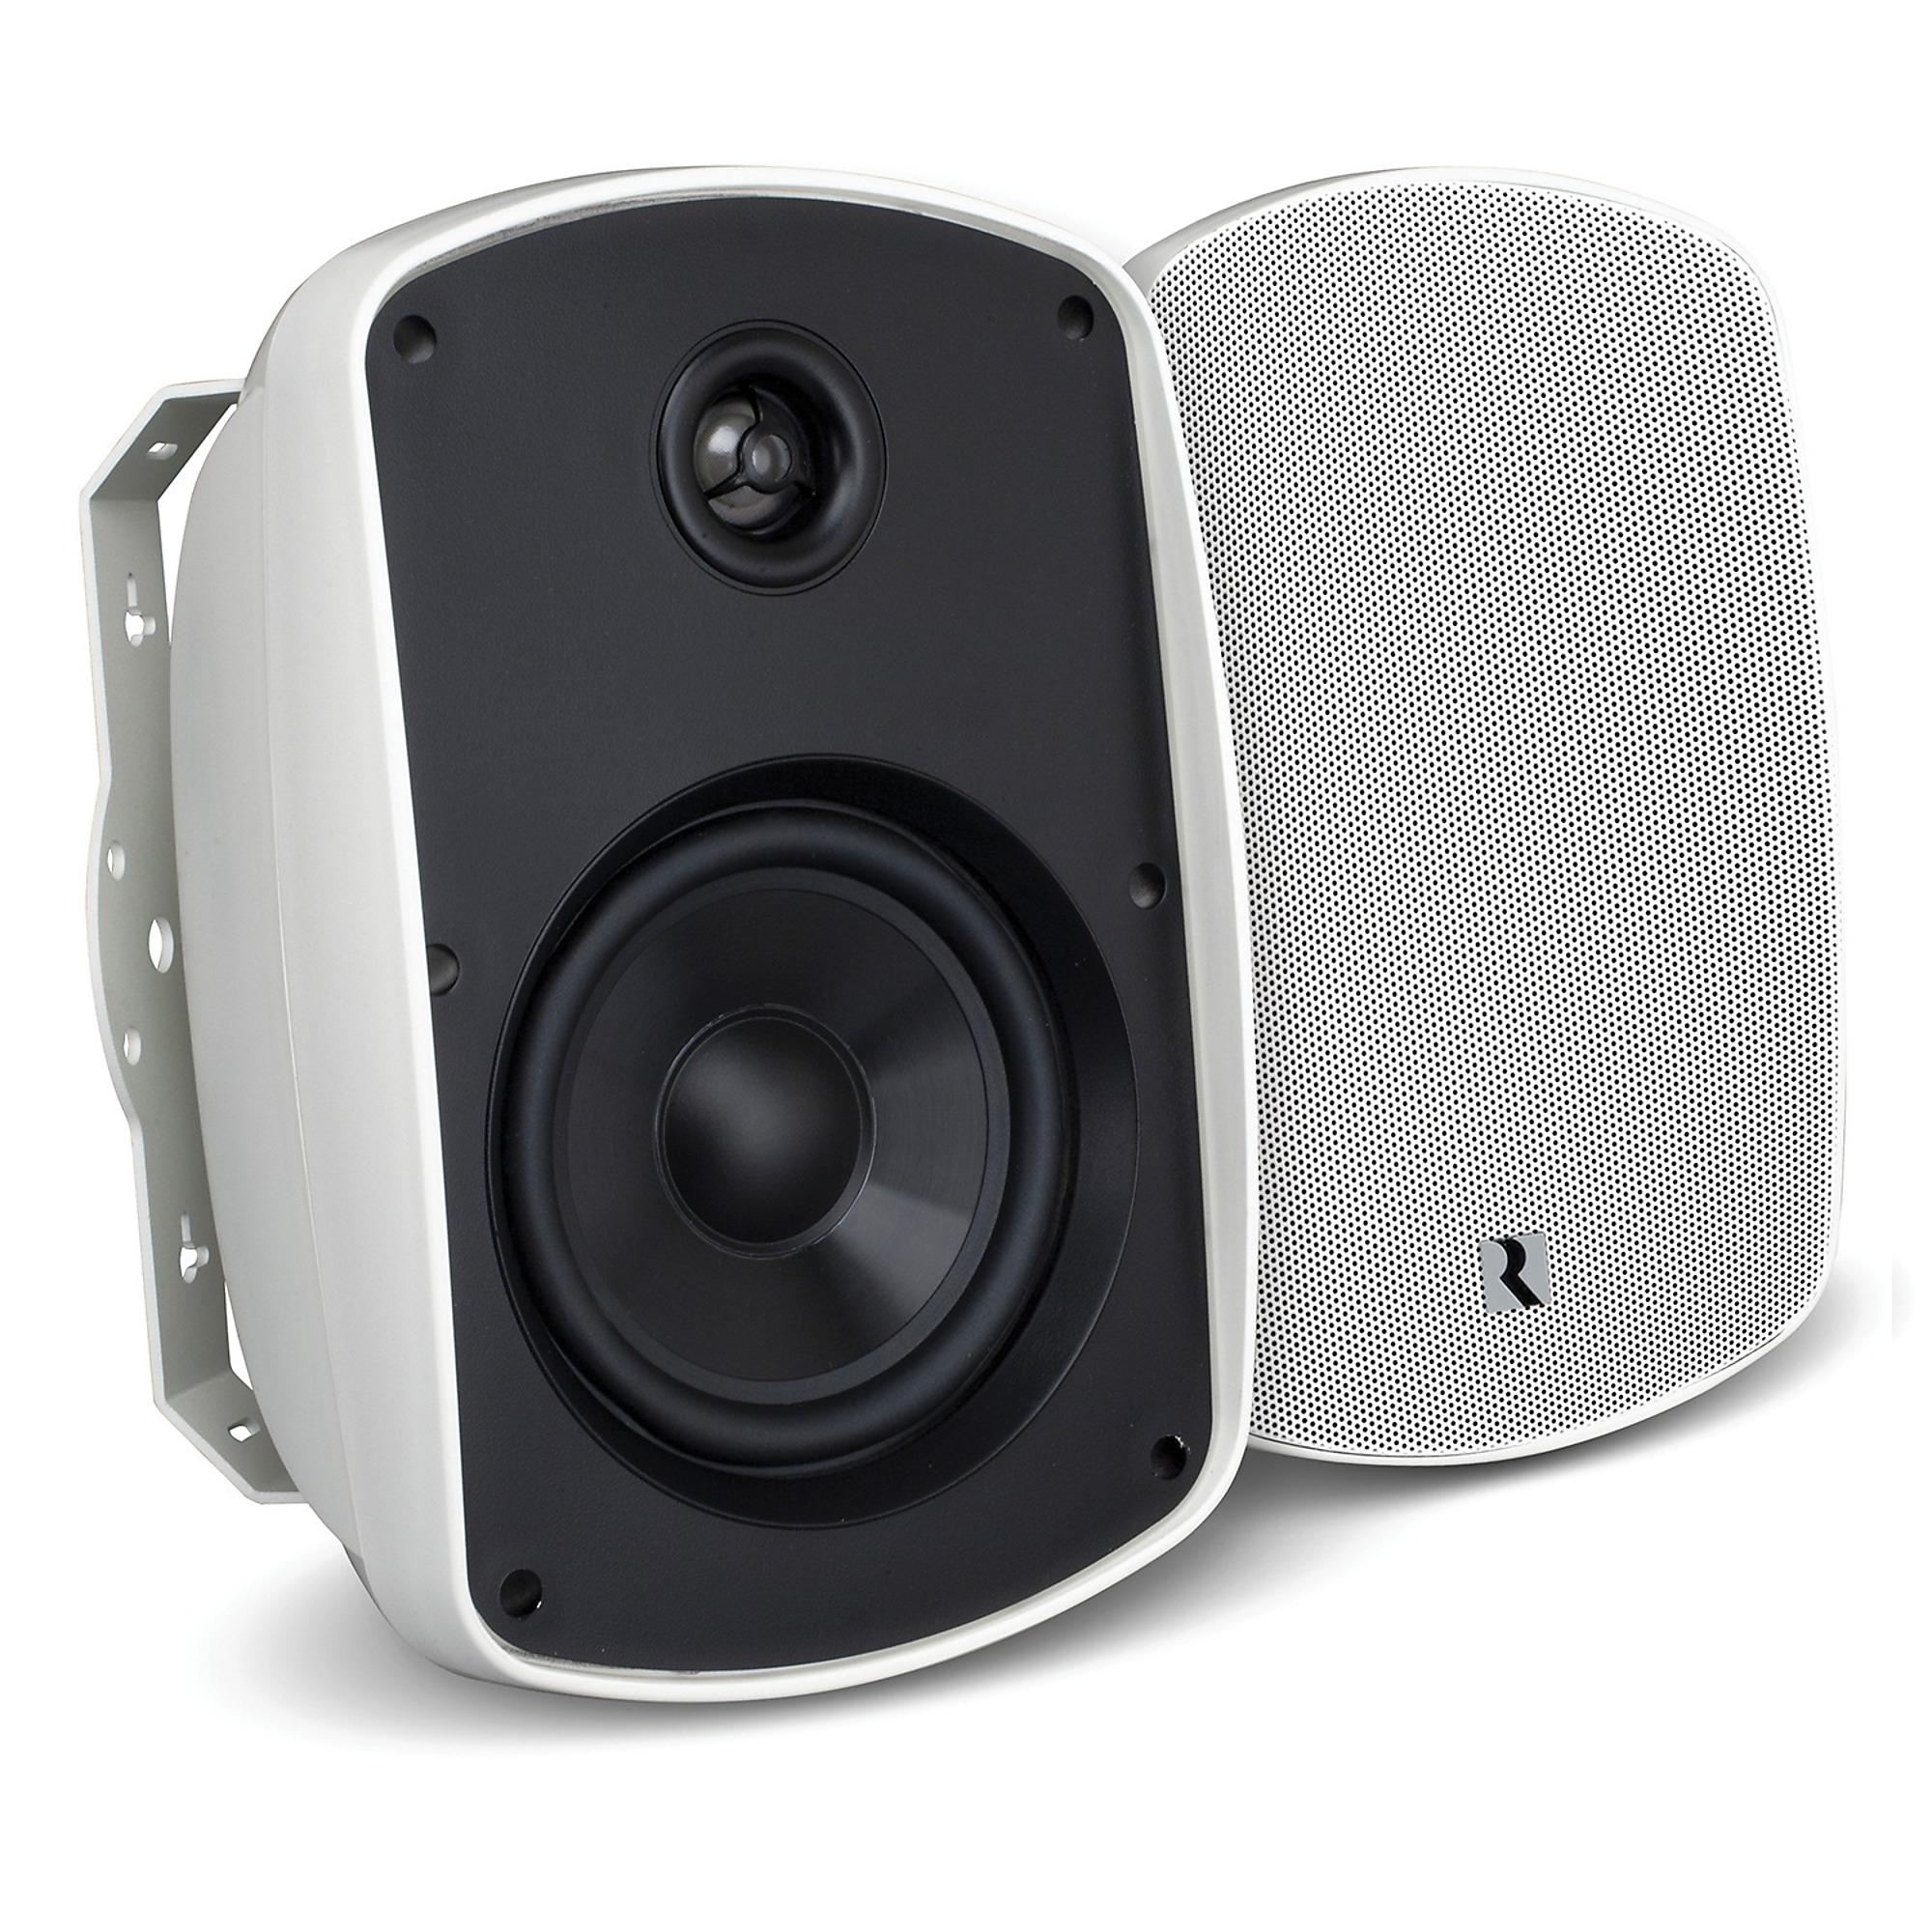 Russound Acclaim 5 Series, OutBack 6.5Inch 2-Way MK2 Outdoor Speakers, 2-Pack, Watts 150 Model 5B65mk2-W